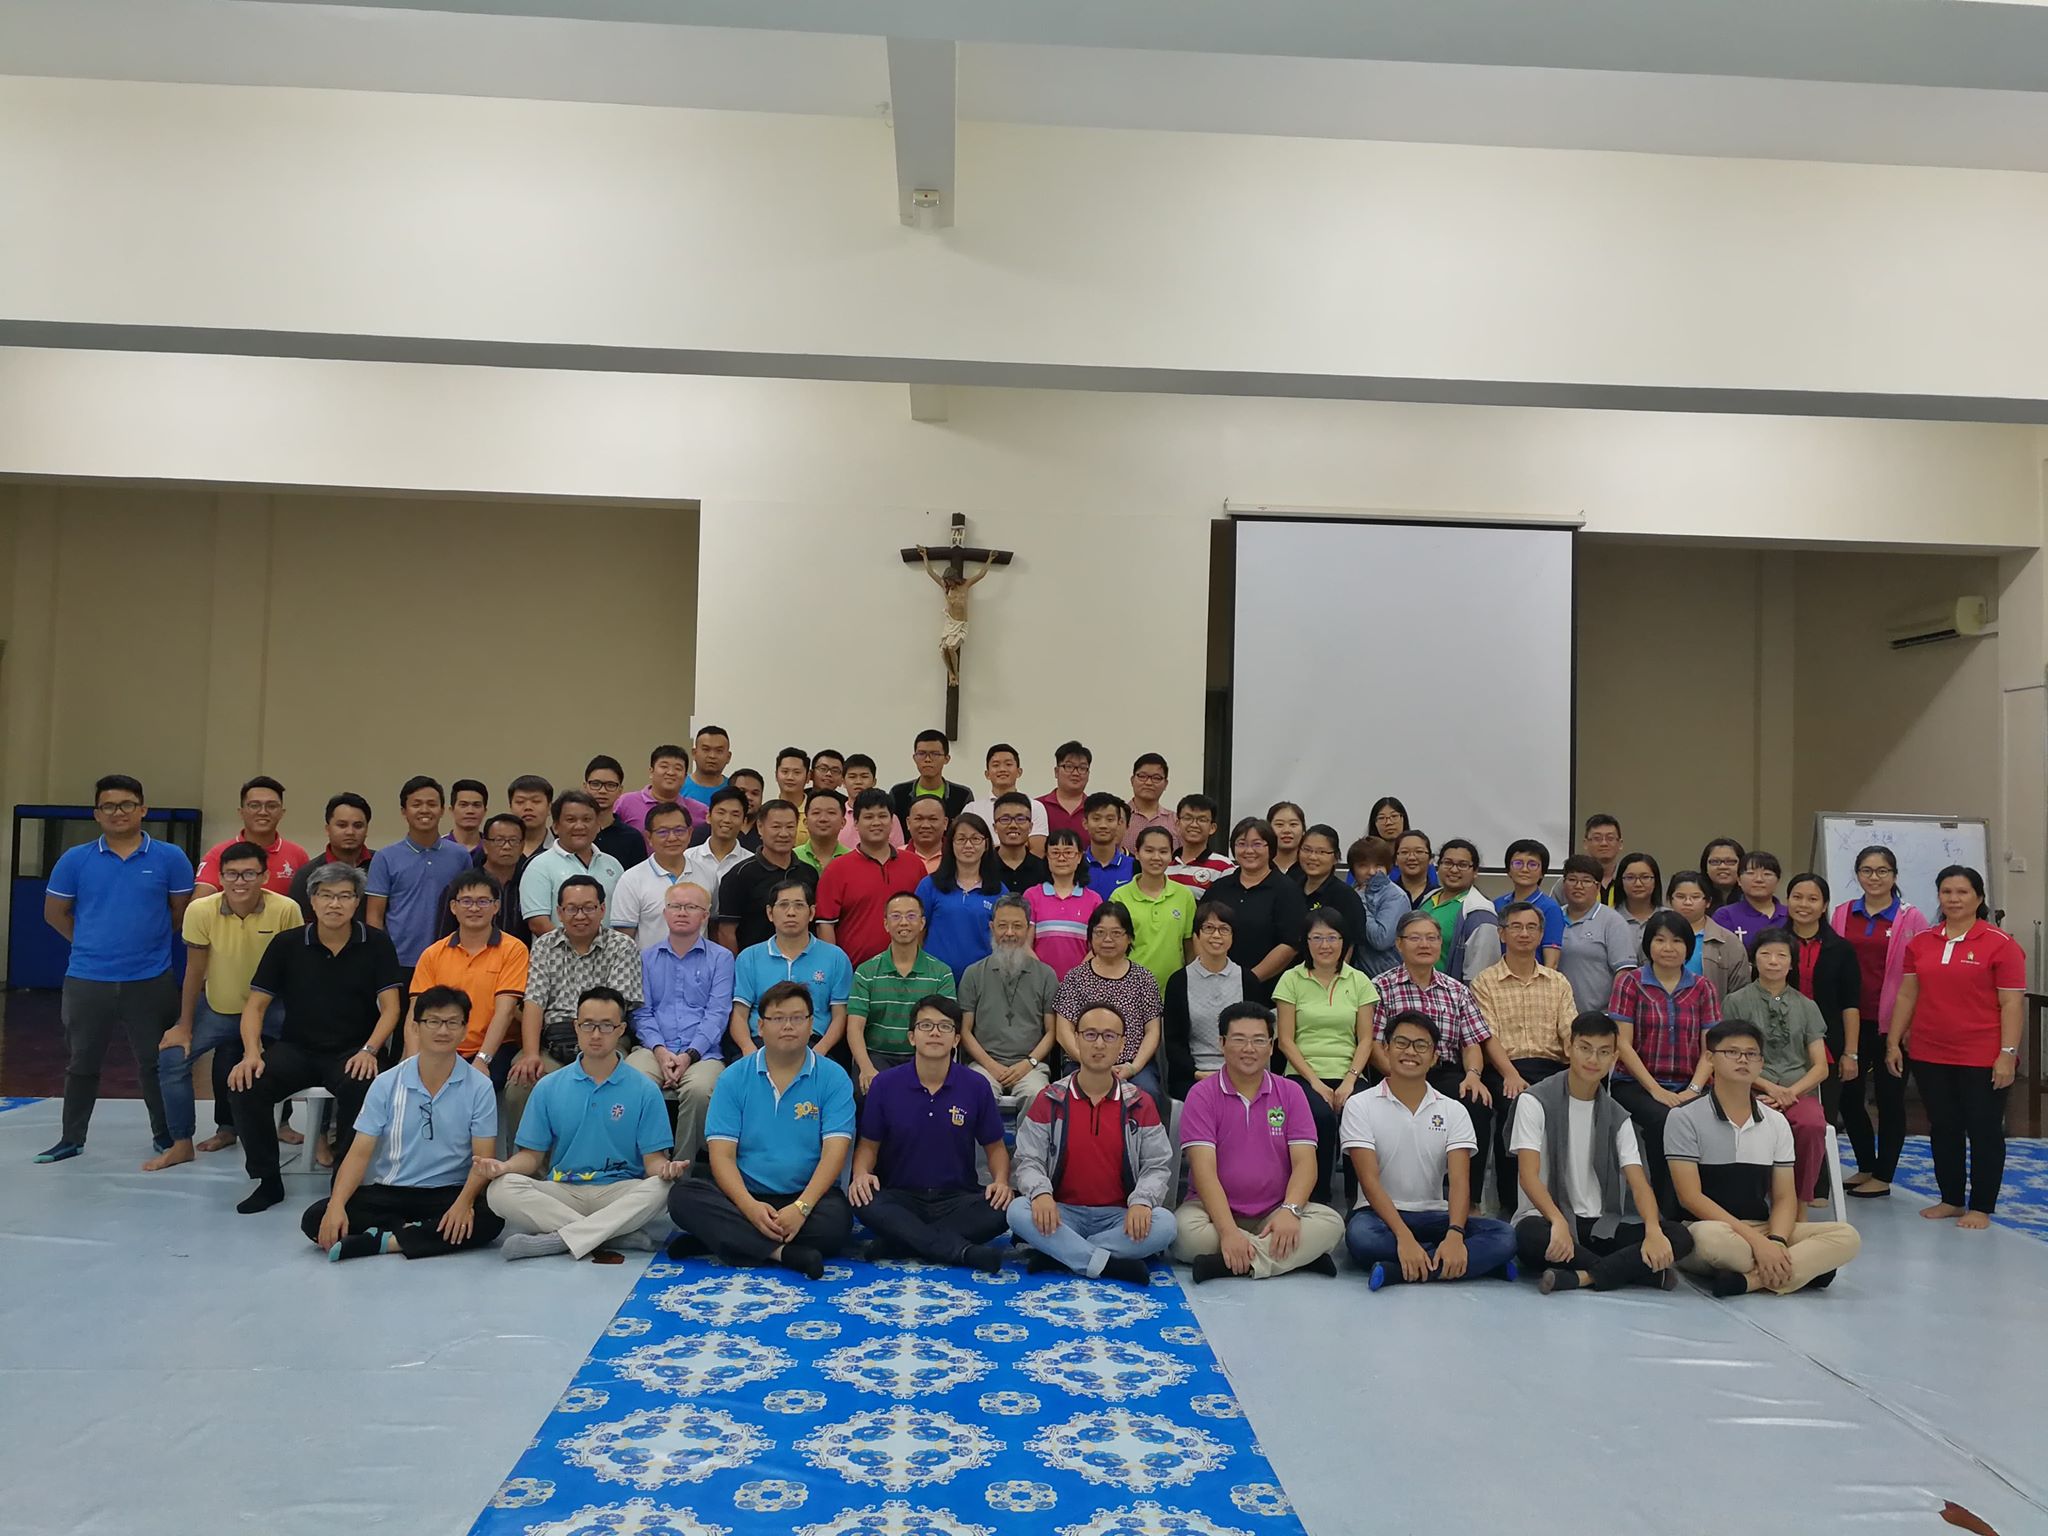 <strong>卫神静修营全体照 MTS Silent Retreat for lecturers and students group photo</strong>